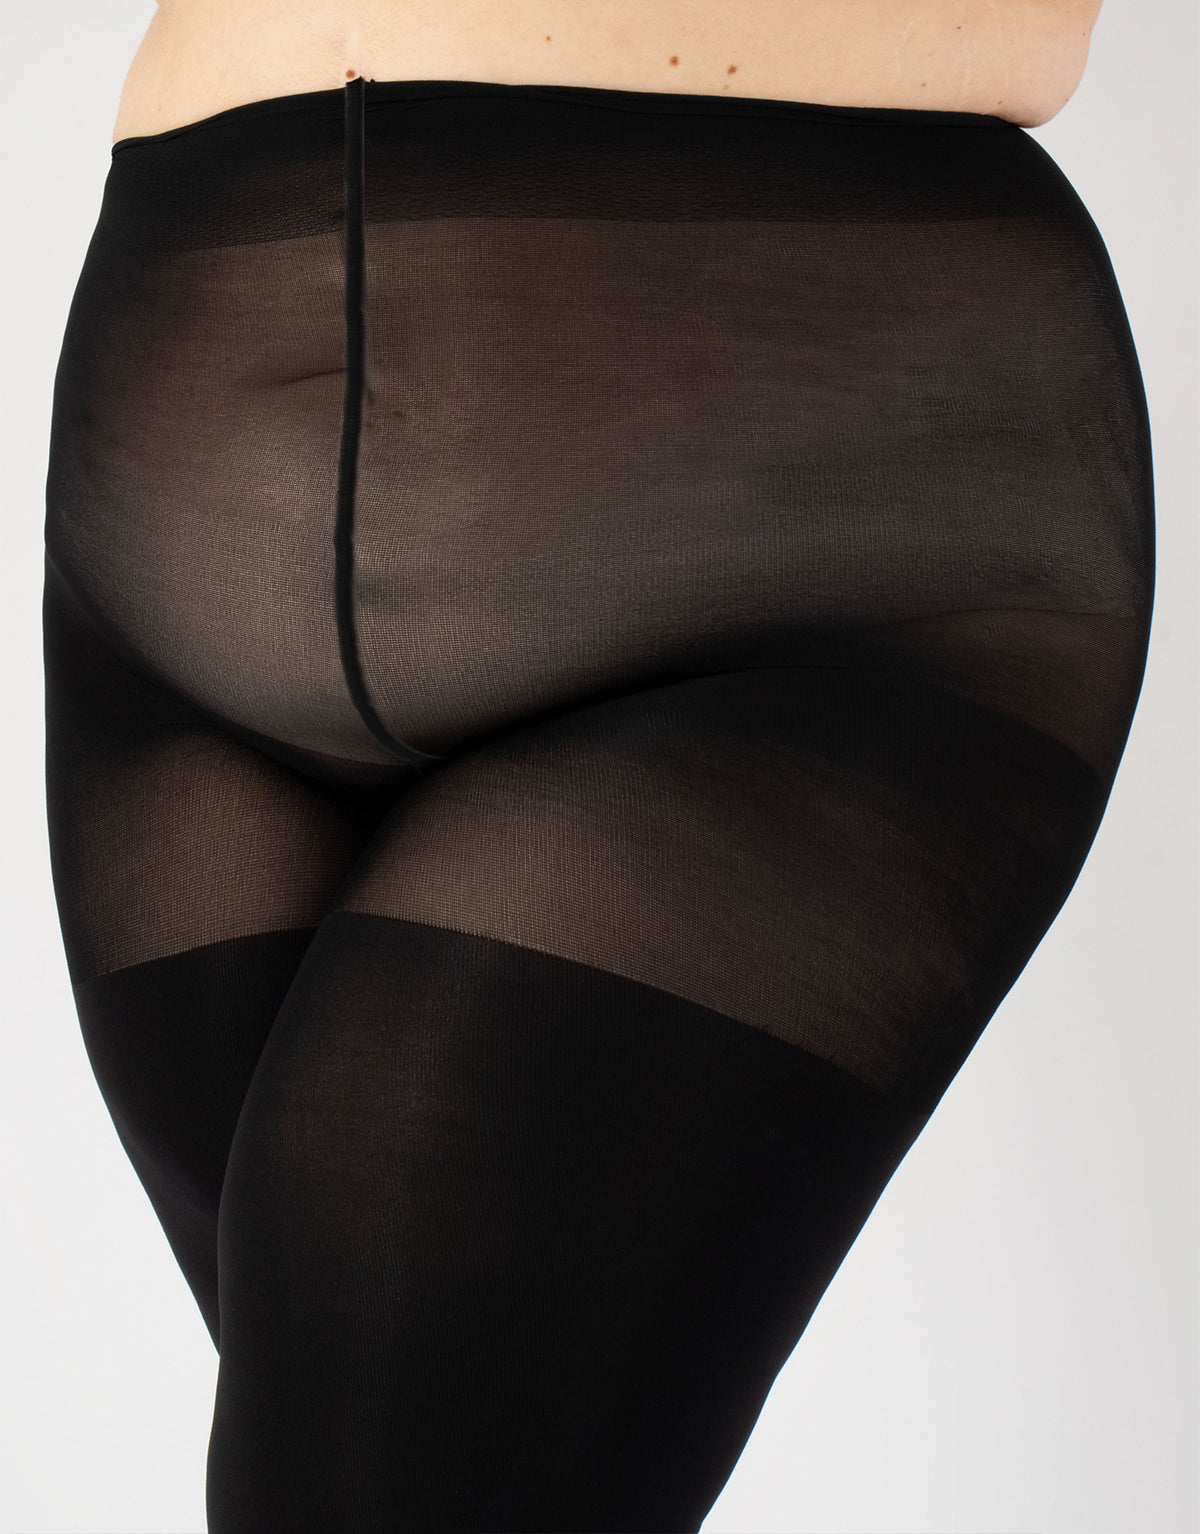 Calzitaly Curvy Footless Tights - 100 Denier black plain opaque plus size footless tights with a sheer super elasticated boxer top, anti-chafing panels, flat seams and cotton gusset.